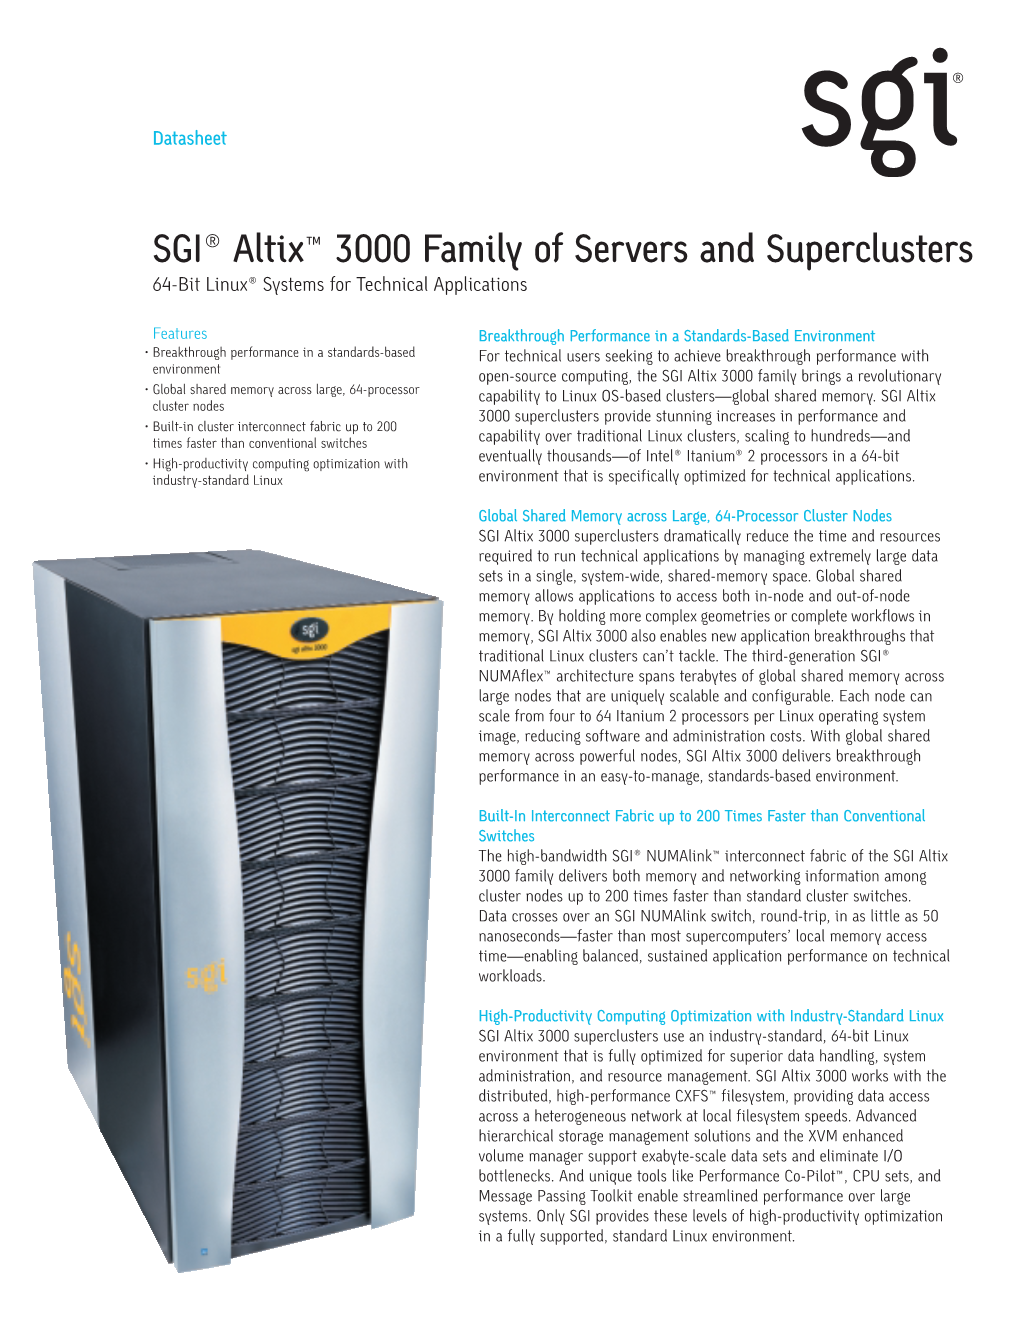 SGI® Altix™ 3000 Family of Servers and Superclusters 64-Bit Linux® Systems for Technical Applications